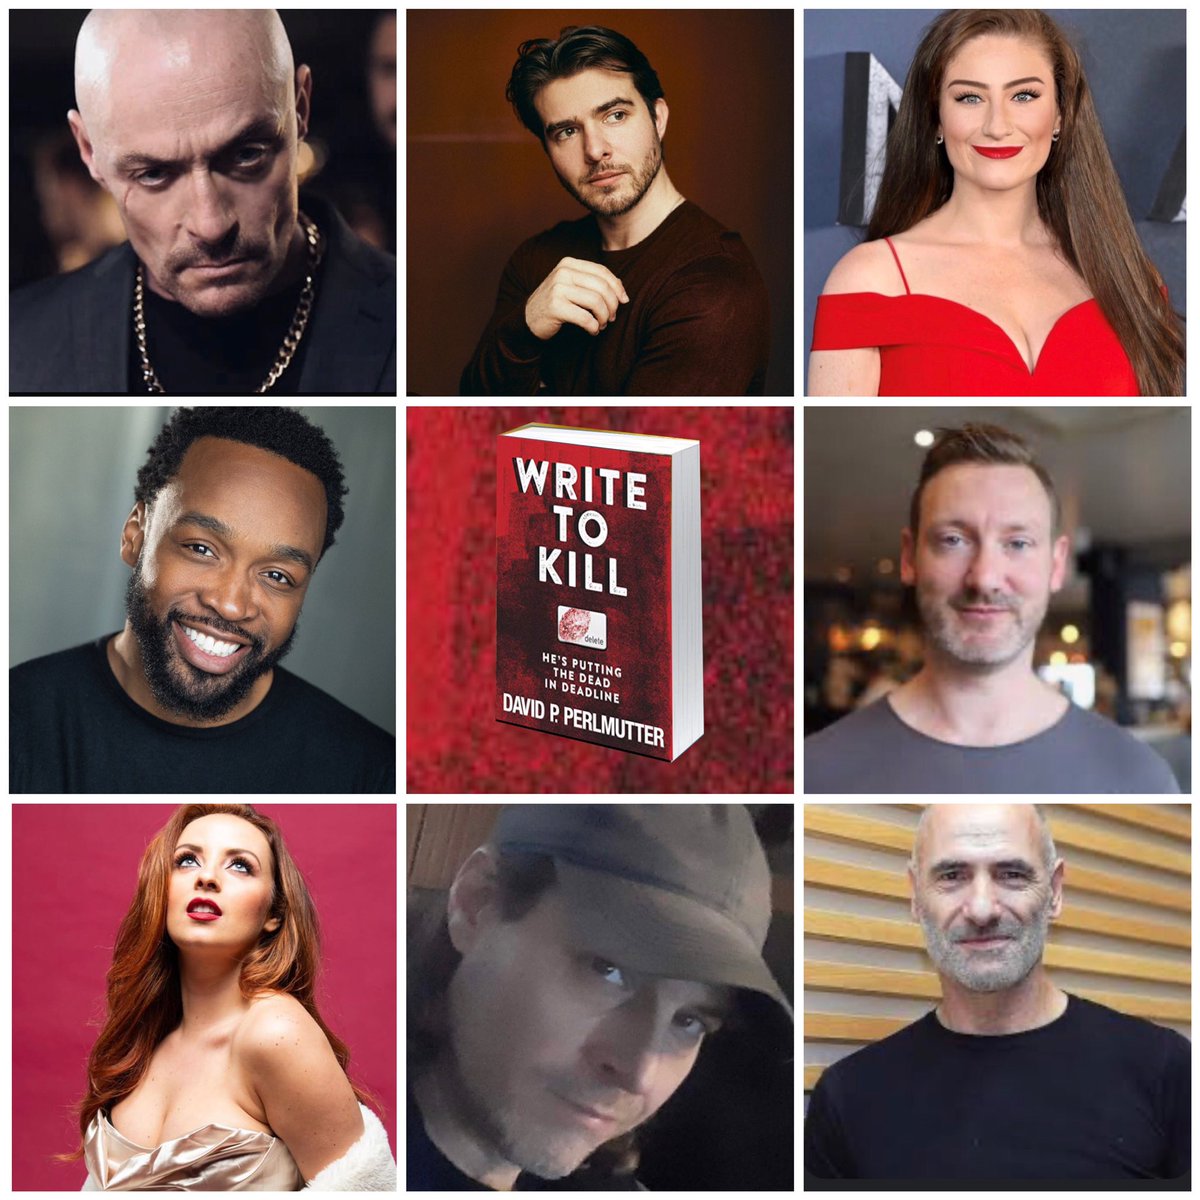 ⭐️ Breaking News ⭐️ Pre-Launch ⭐️ TV Pilot ⭐️ Write To Kill ⭐️ The @Kickstarter funding campaign for the #WriteToKill - TV Pilot, kicks off with this Pre-Launch and will go LIVE in 7 days. The initial cast for the TV Pilot is FANTASTIC with @SeanPCronin as the EVIL Mad